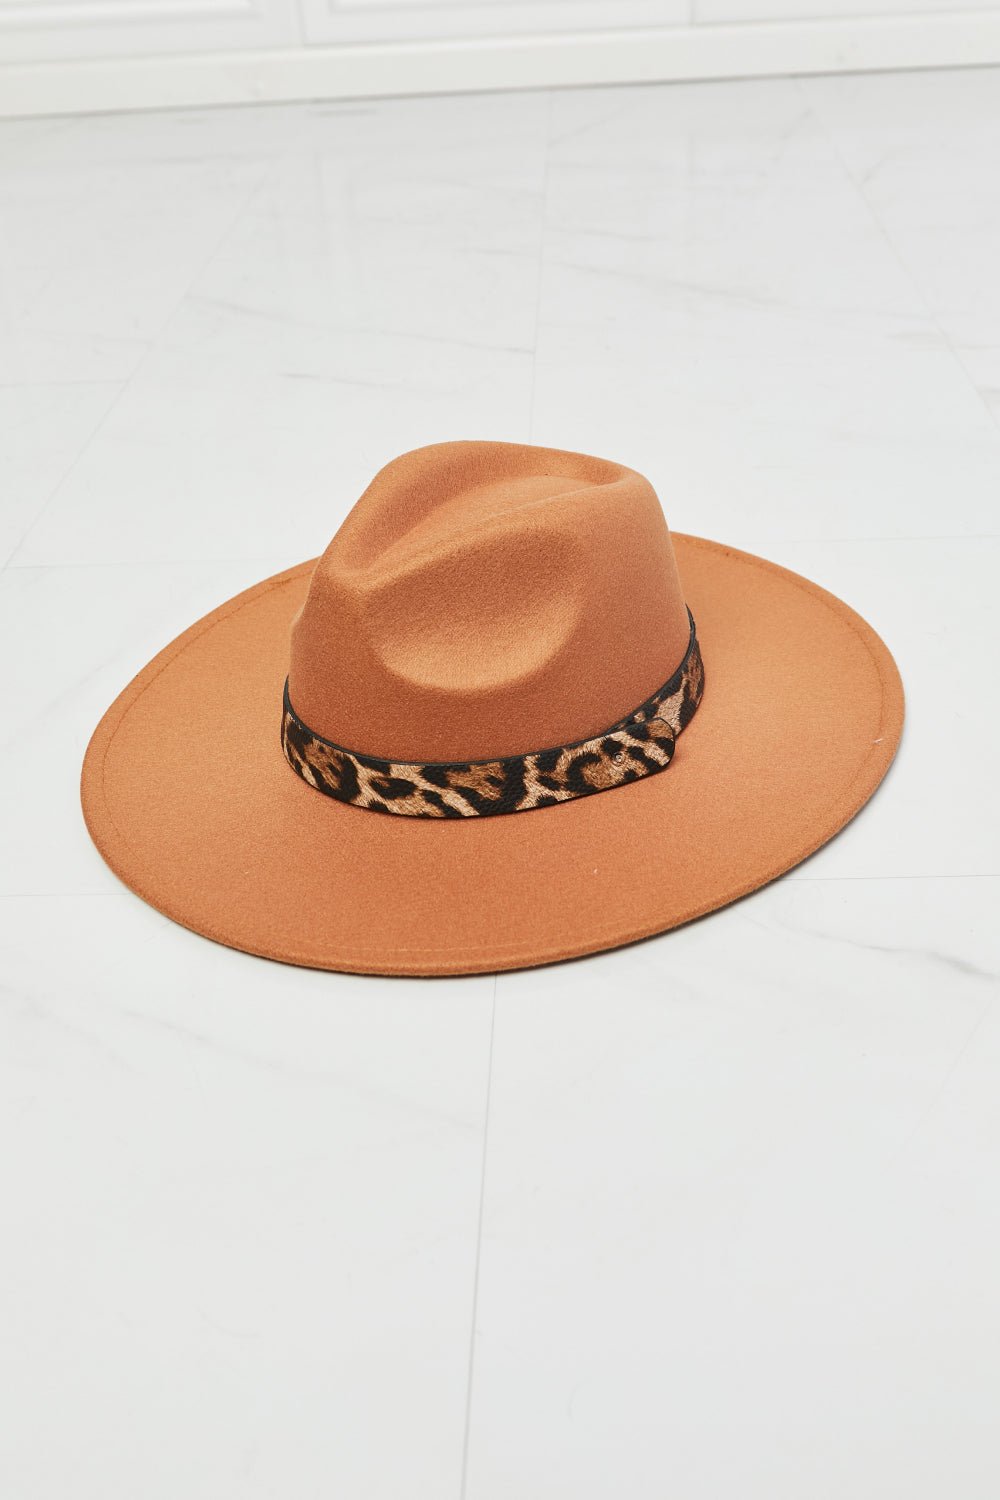 Fame In The Wild Leopard Detail Fedora Hat - Shah S. Sahota